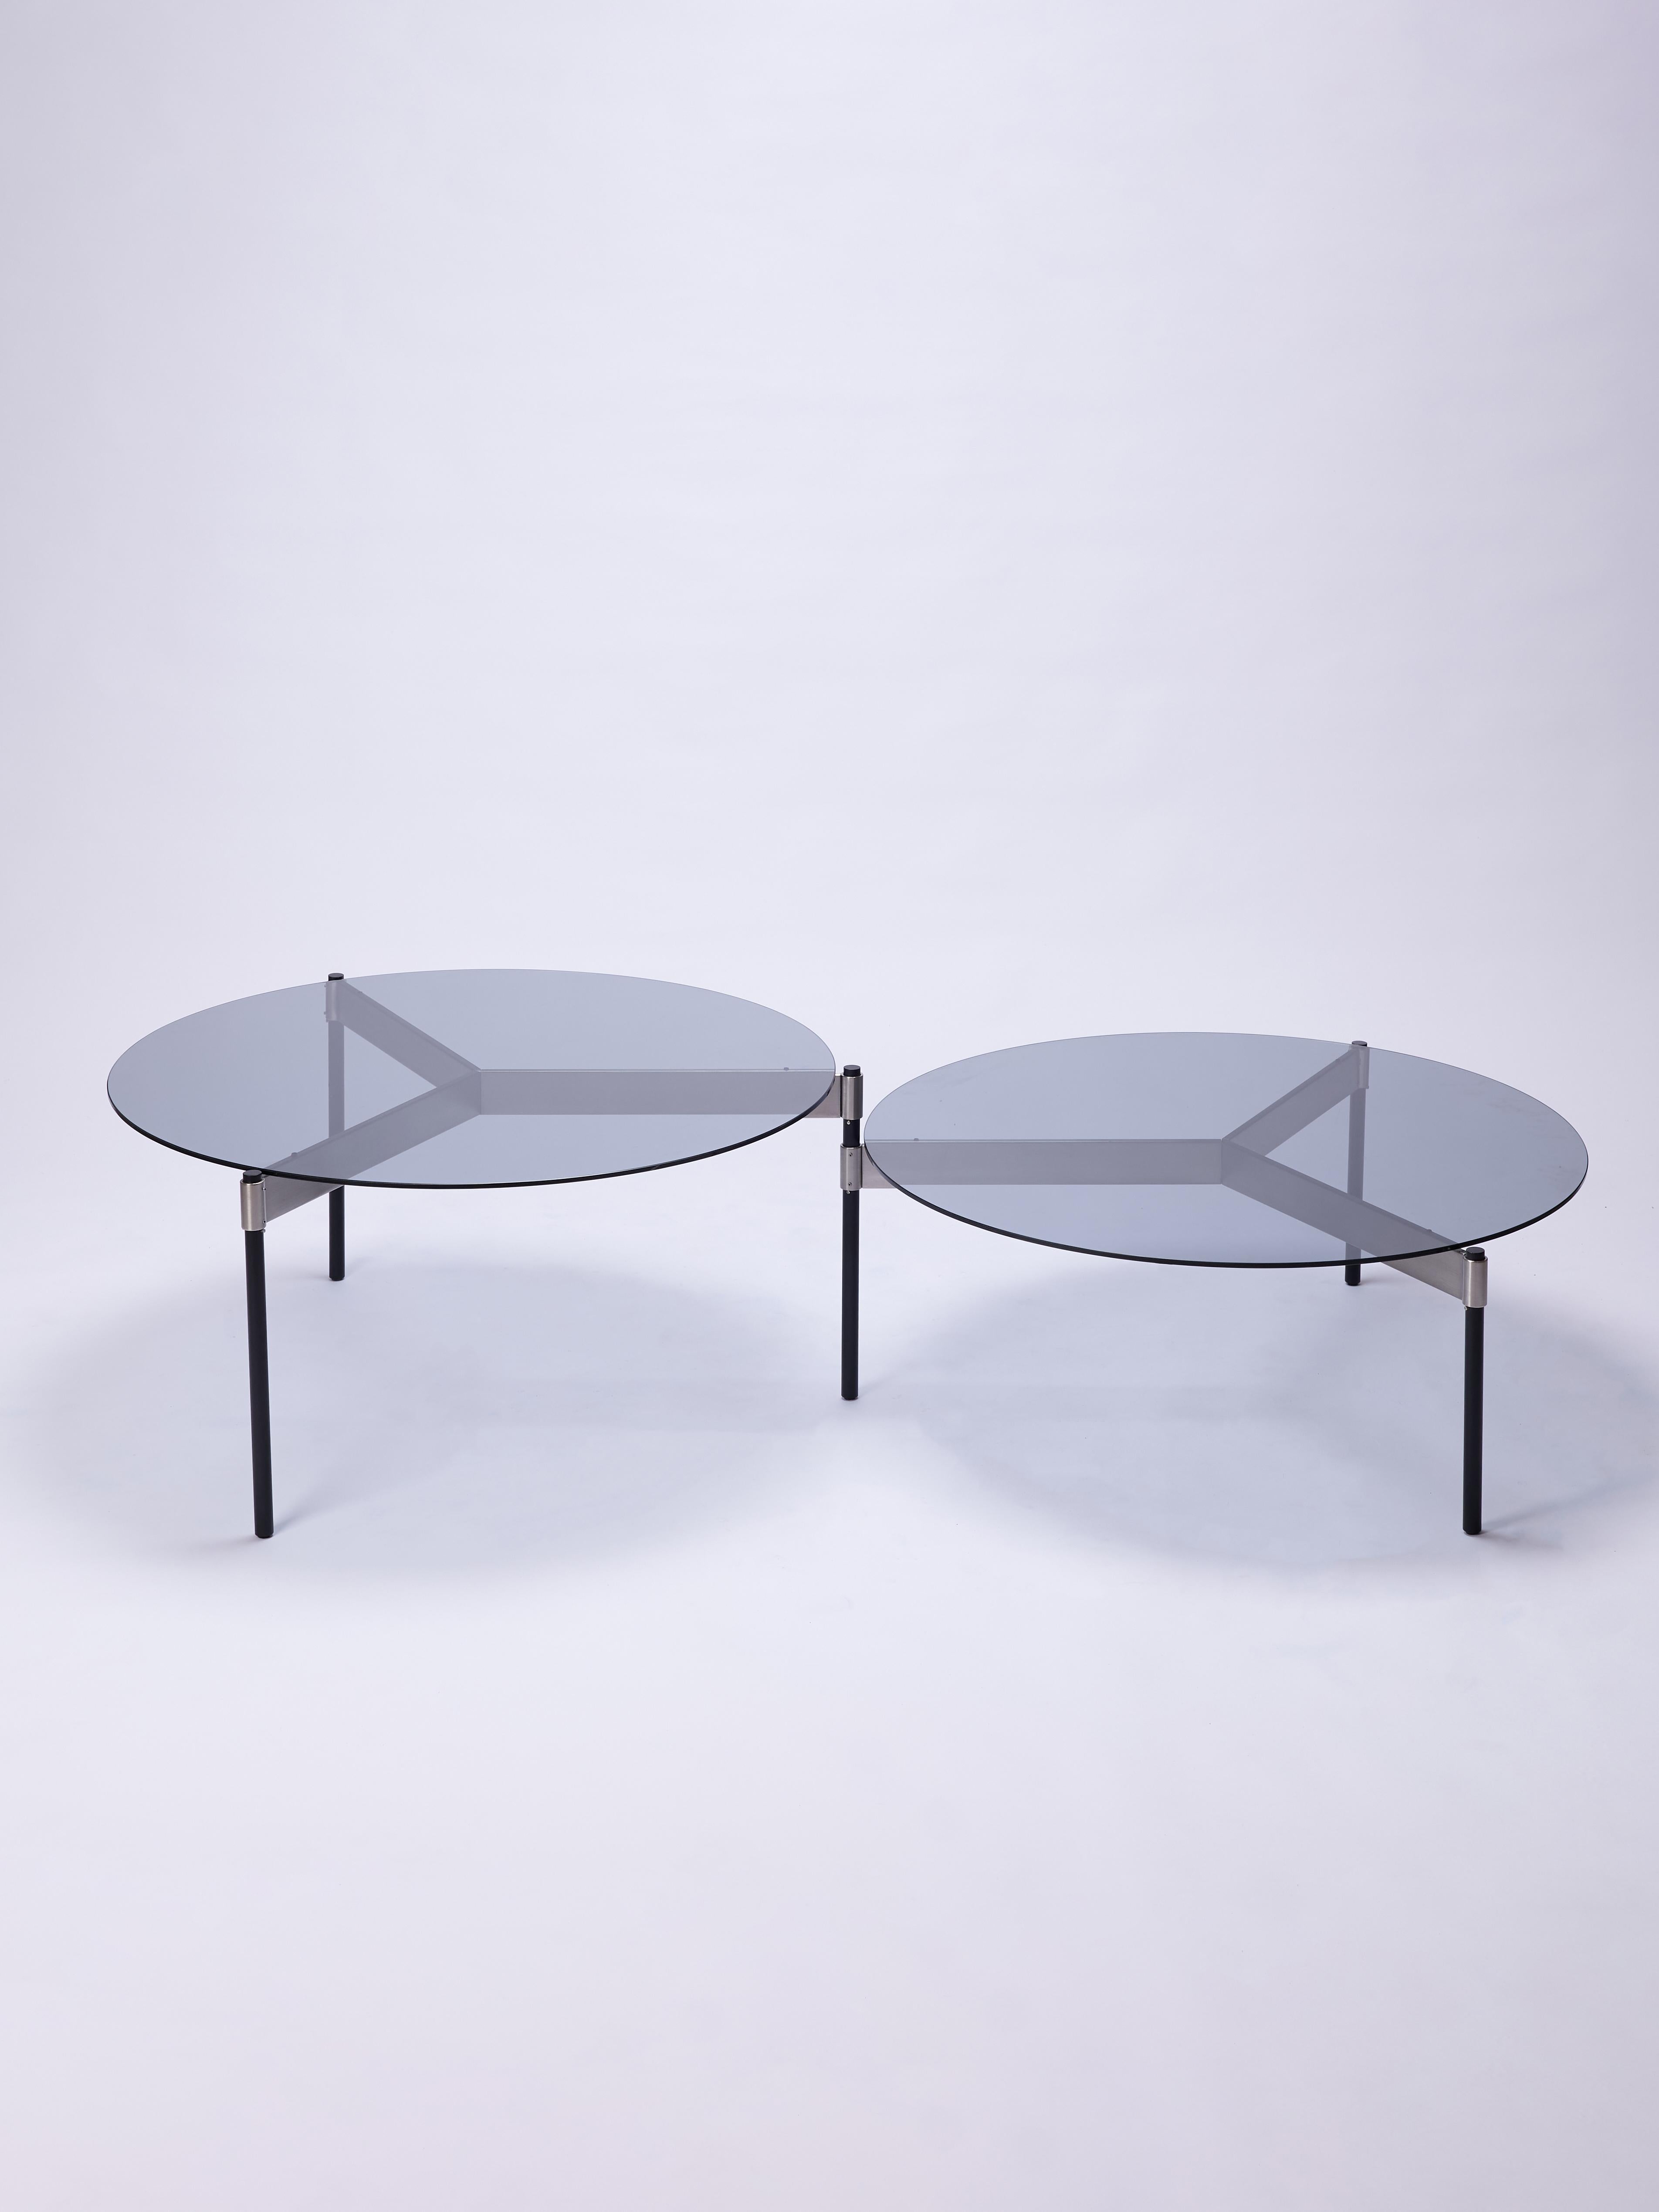 Moon is a single coffee table conformed by three round tops, which by rotating on the axis of the leg they share with its adjacent top, allows different configurations to be formed.

This version of the table features smoked glass tops,